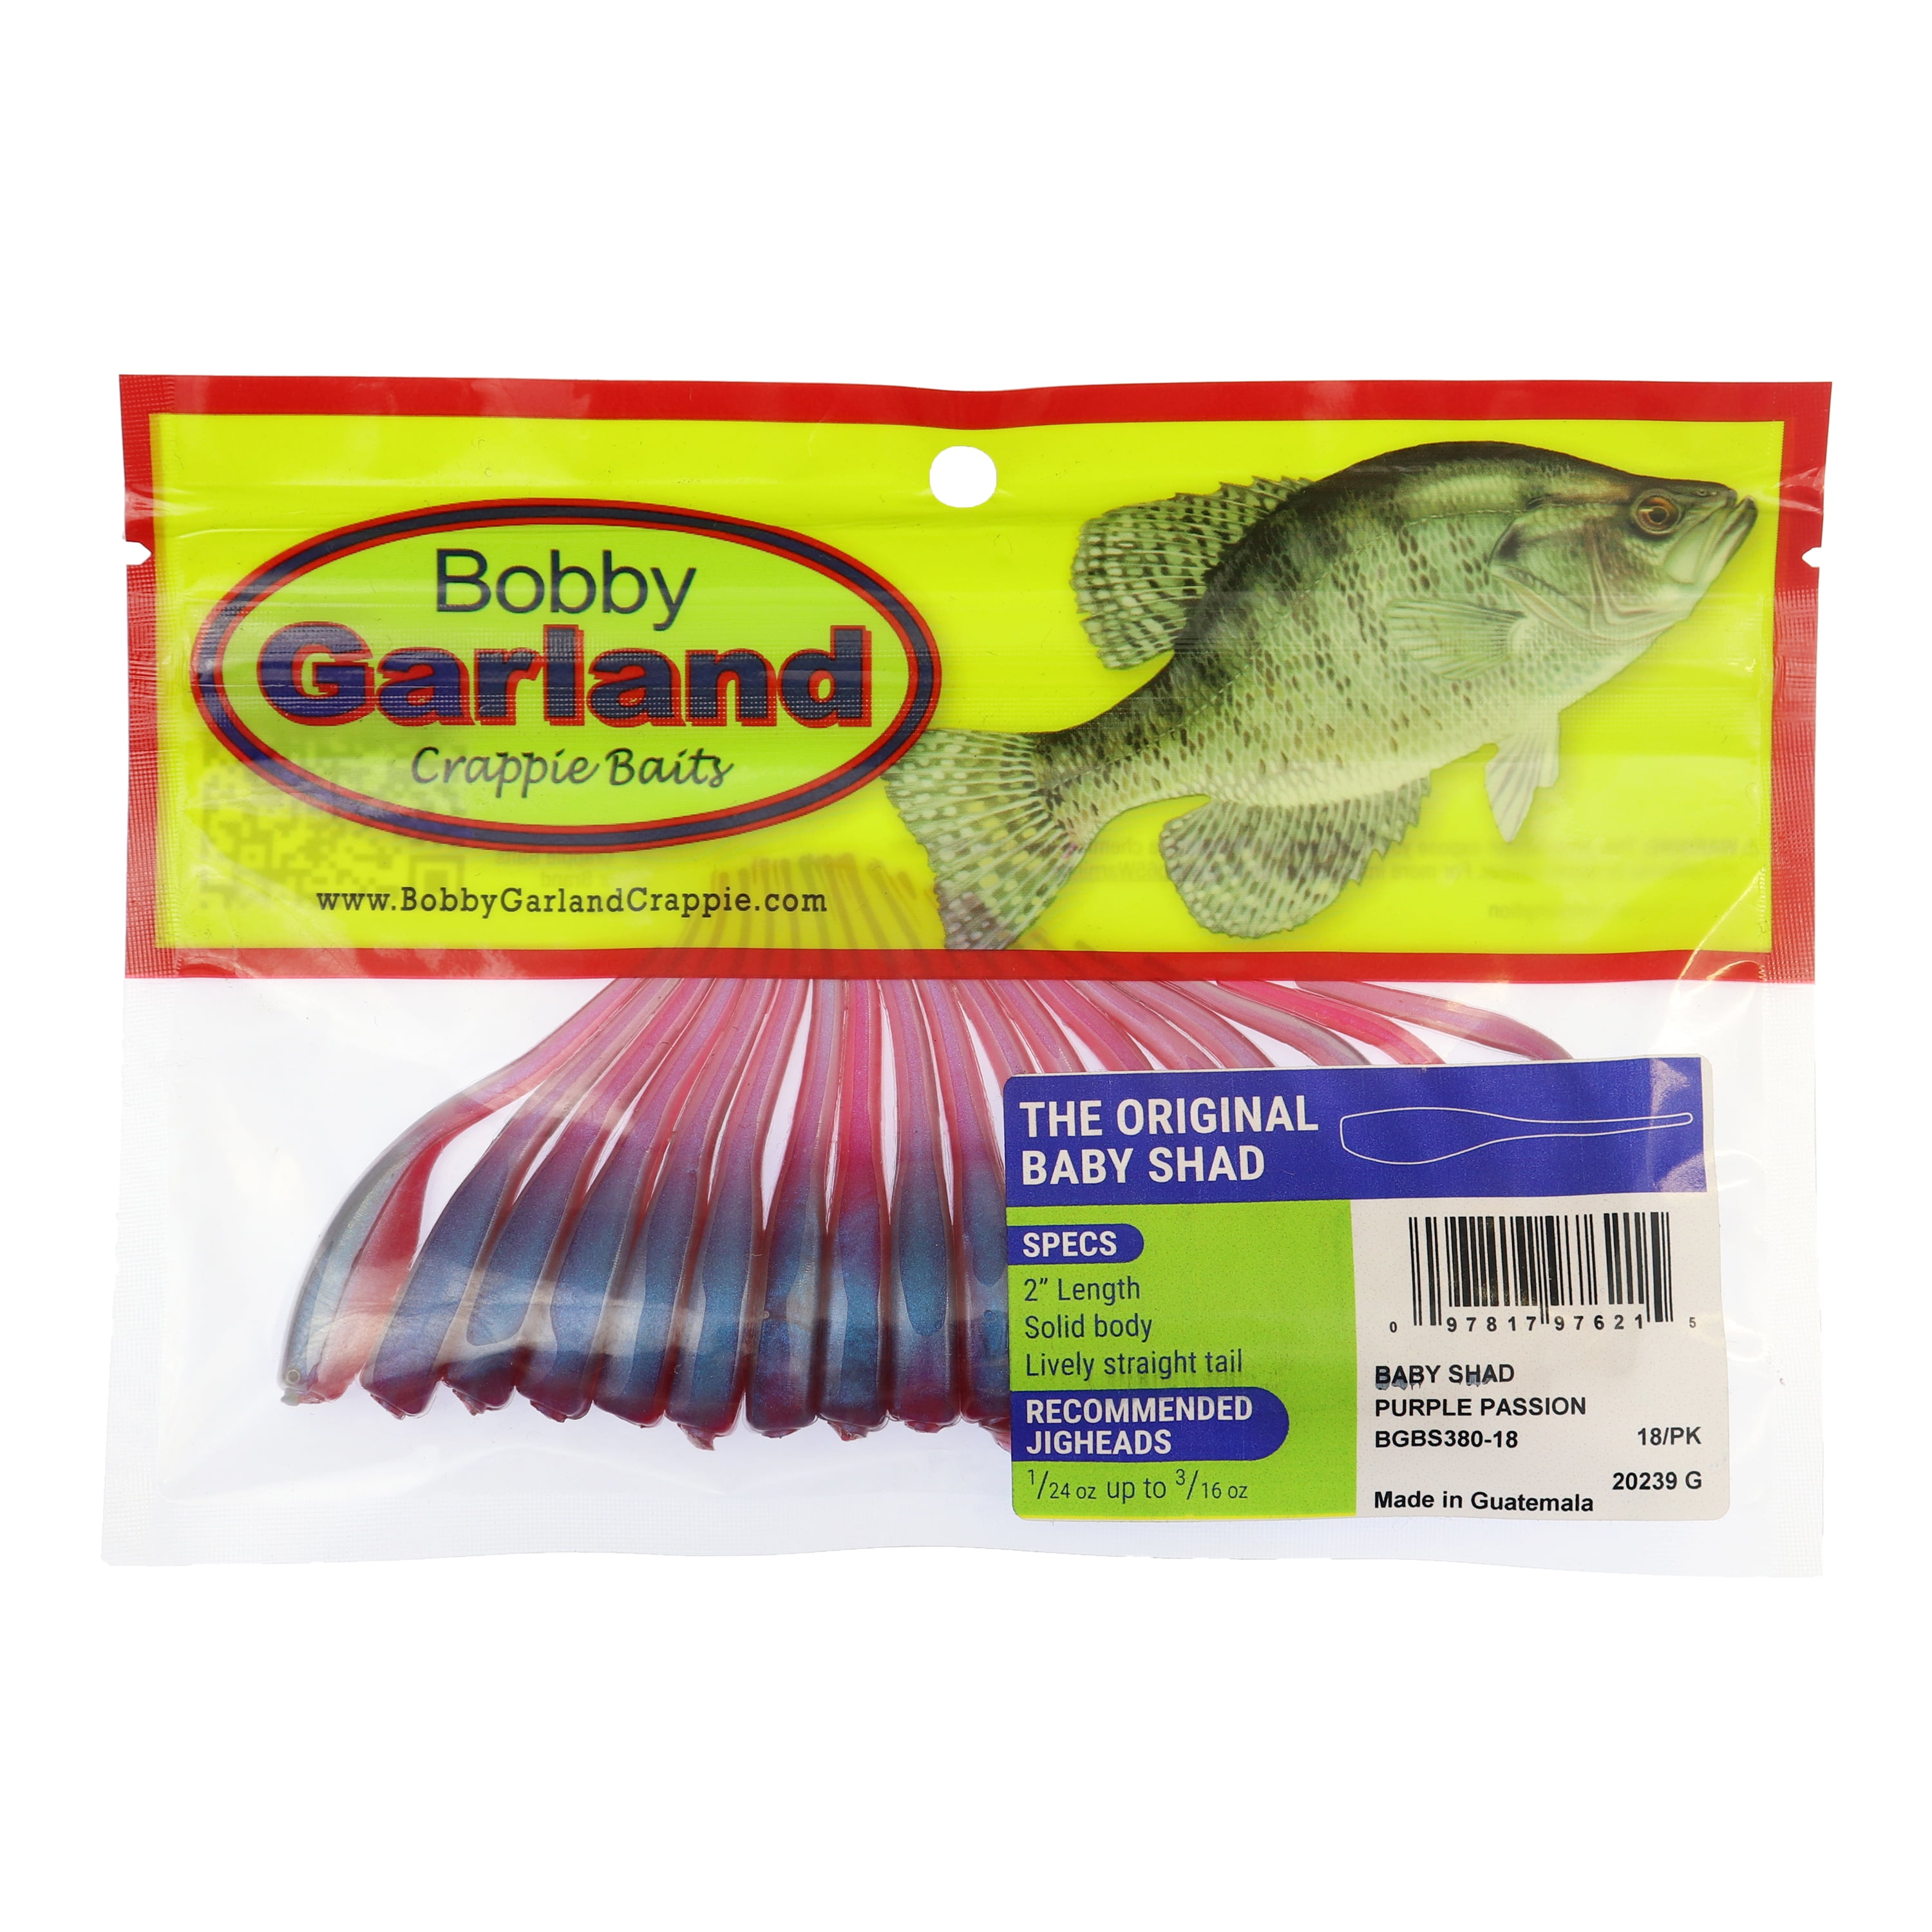 Bobby Garland Baby Shad Crappie Bait 2 Blue Ice 18 Count 